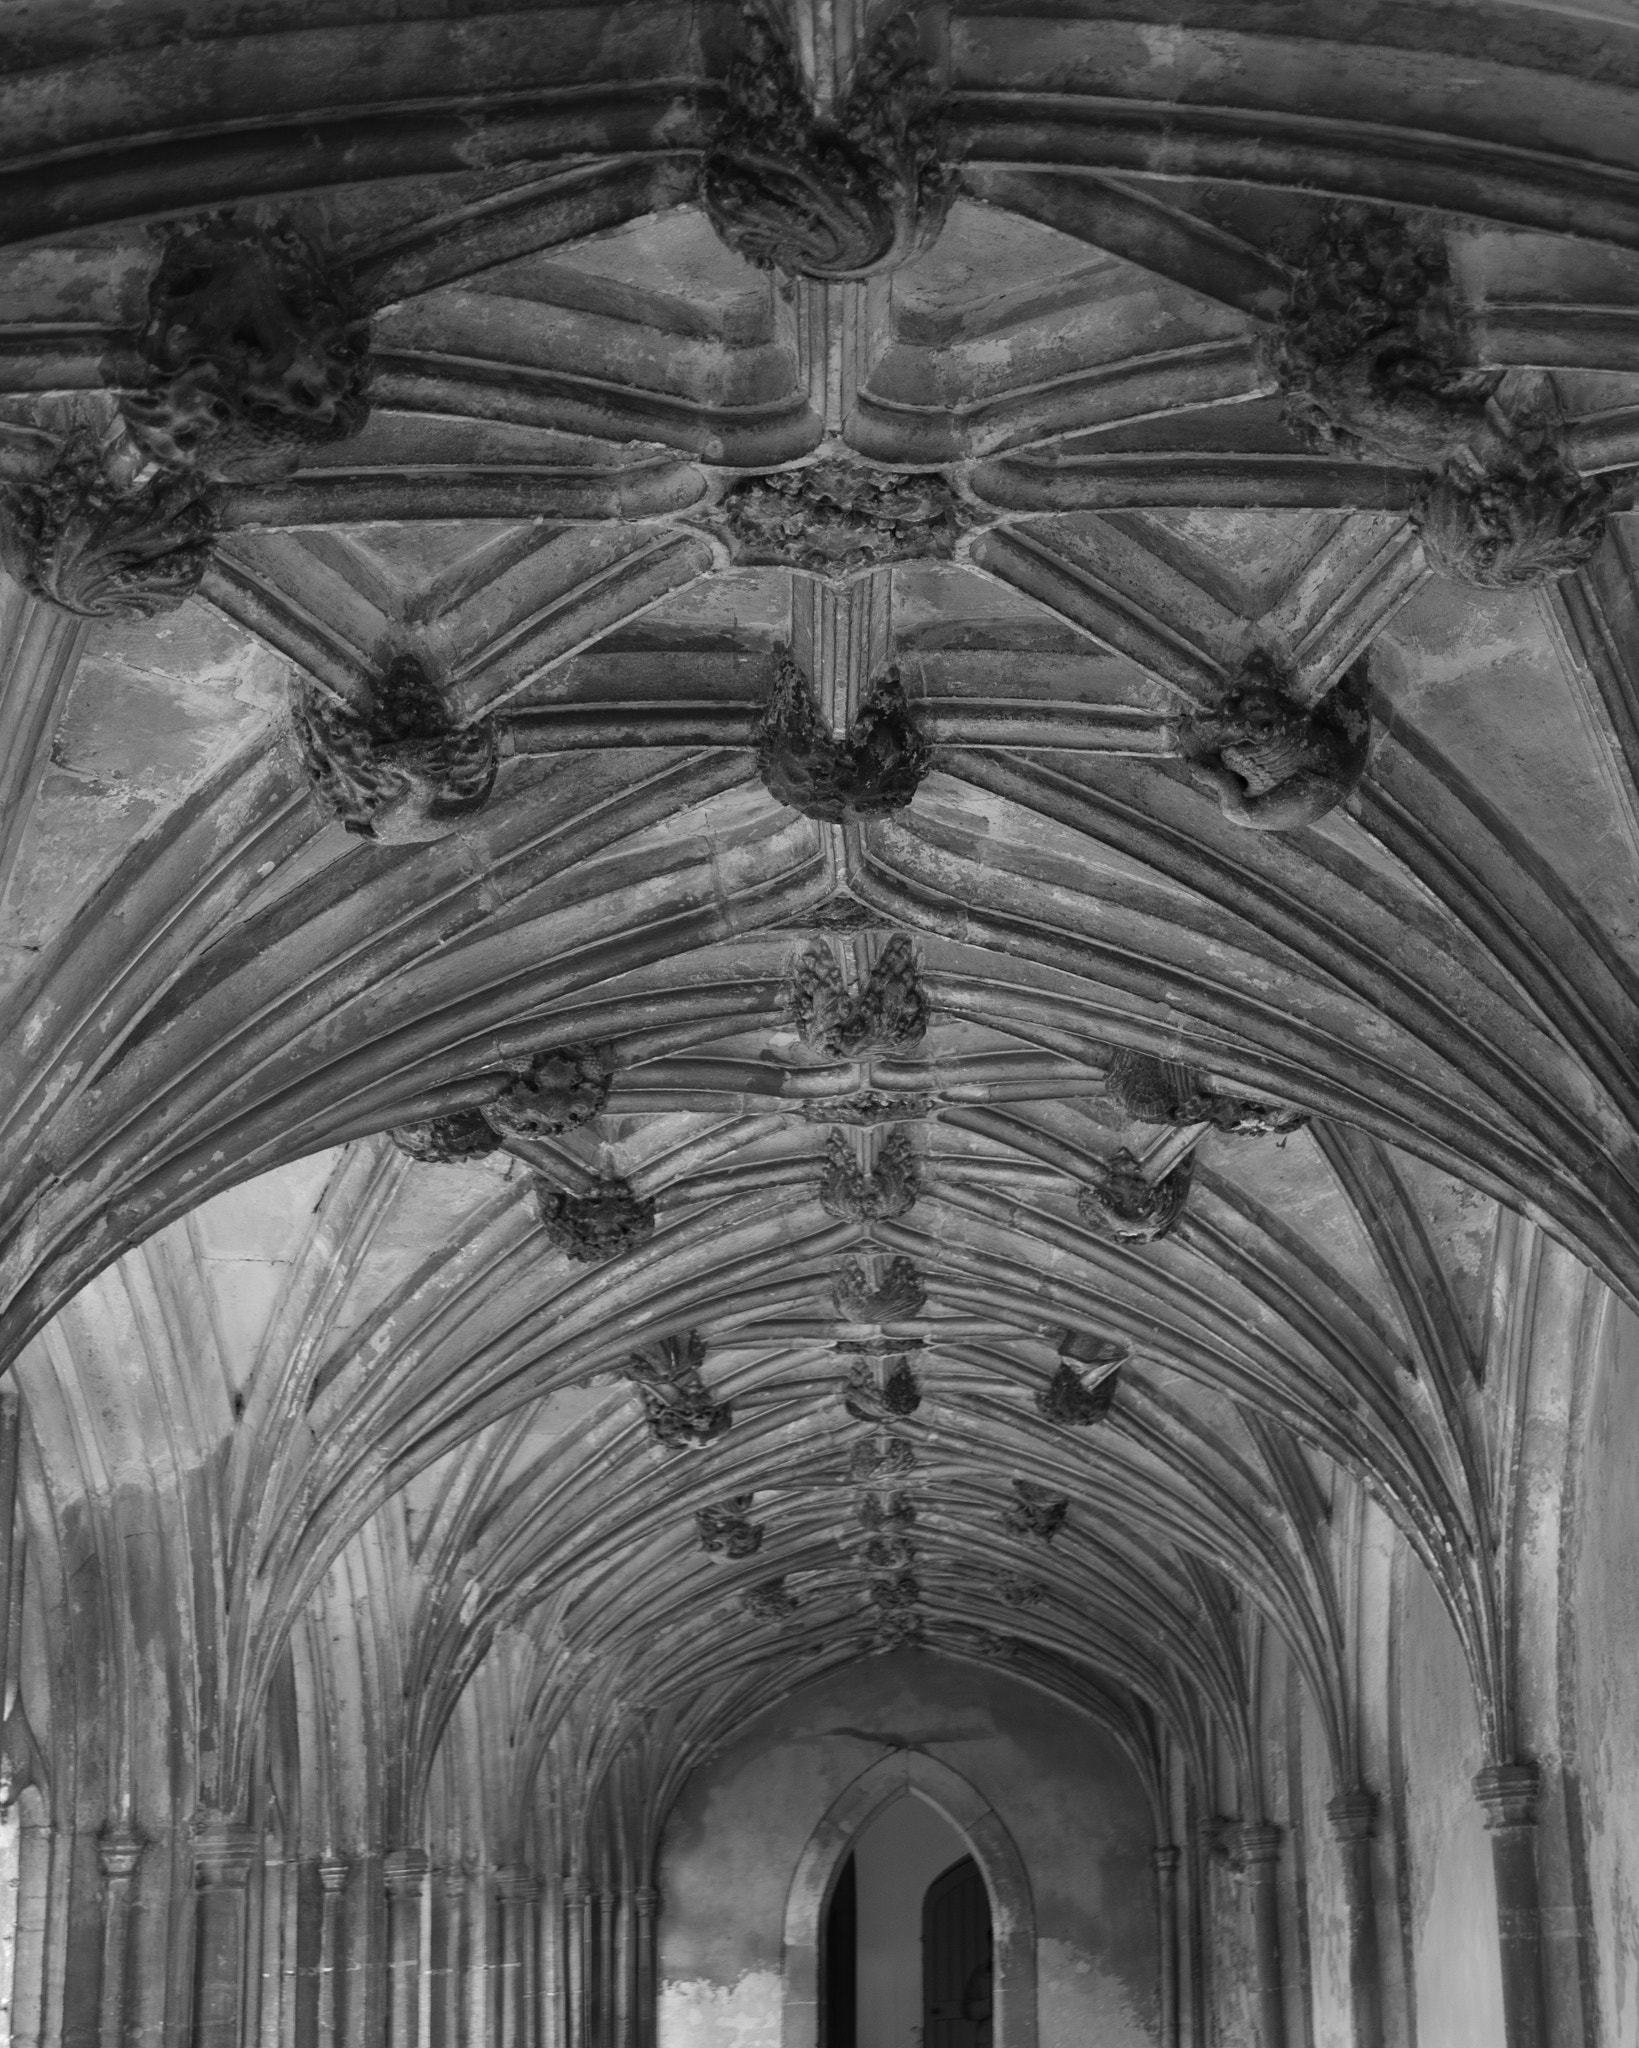 Pentax K-3 II + Sigma 17-50mm F2.8 EX DC HSM sample photo. Lacock abbey ceiling photography